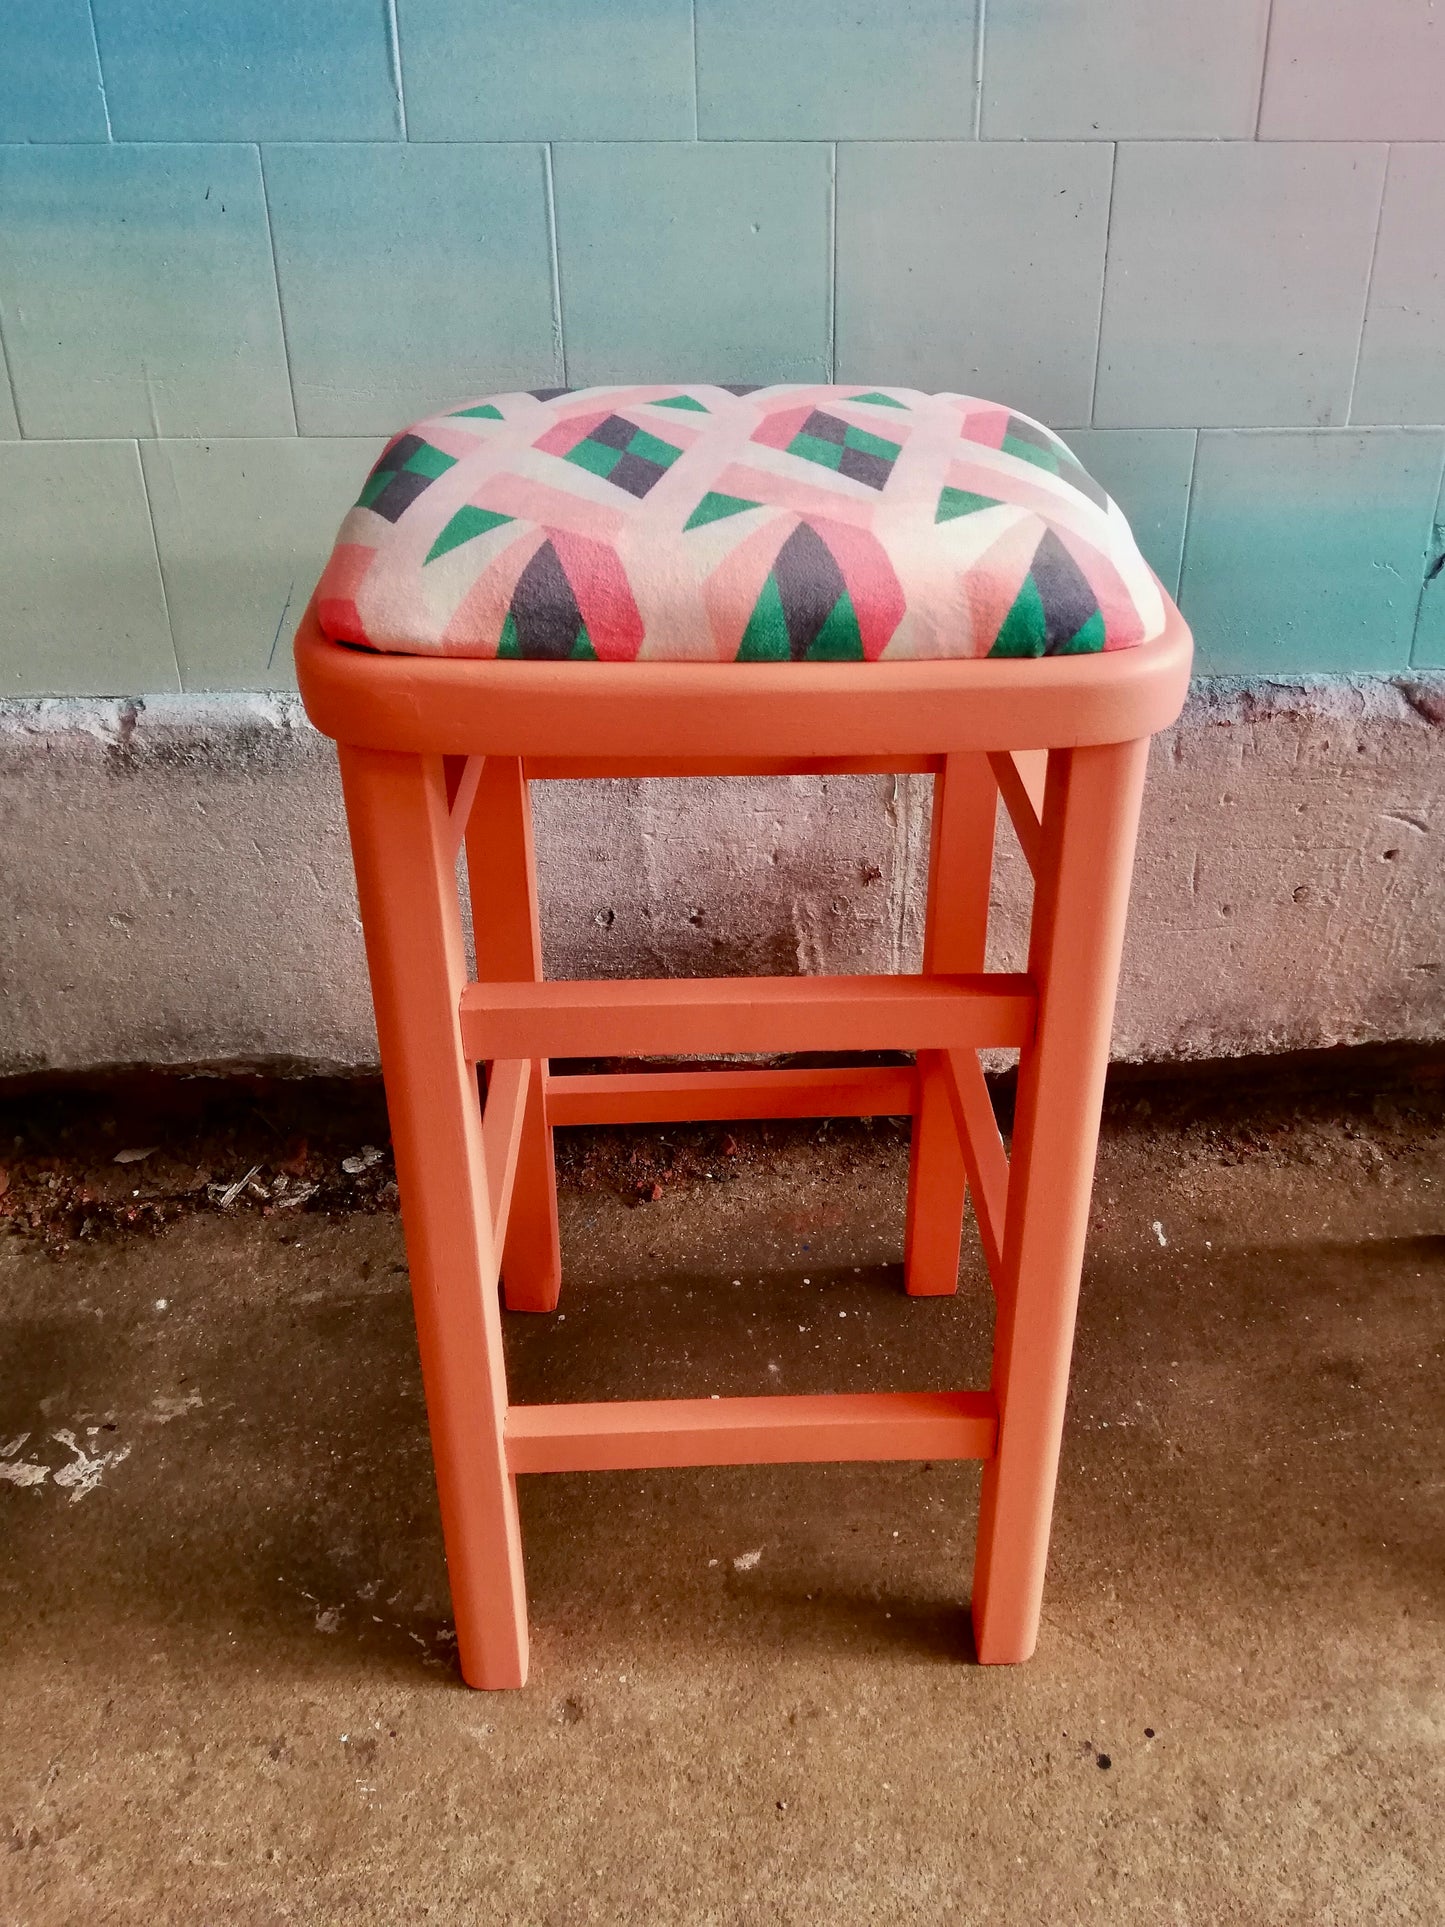 4 vintage stools all painted and reupholstered in beautiful geometric velvet